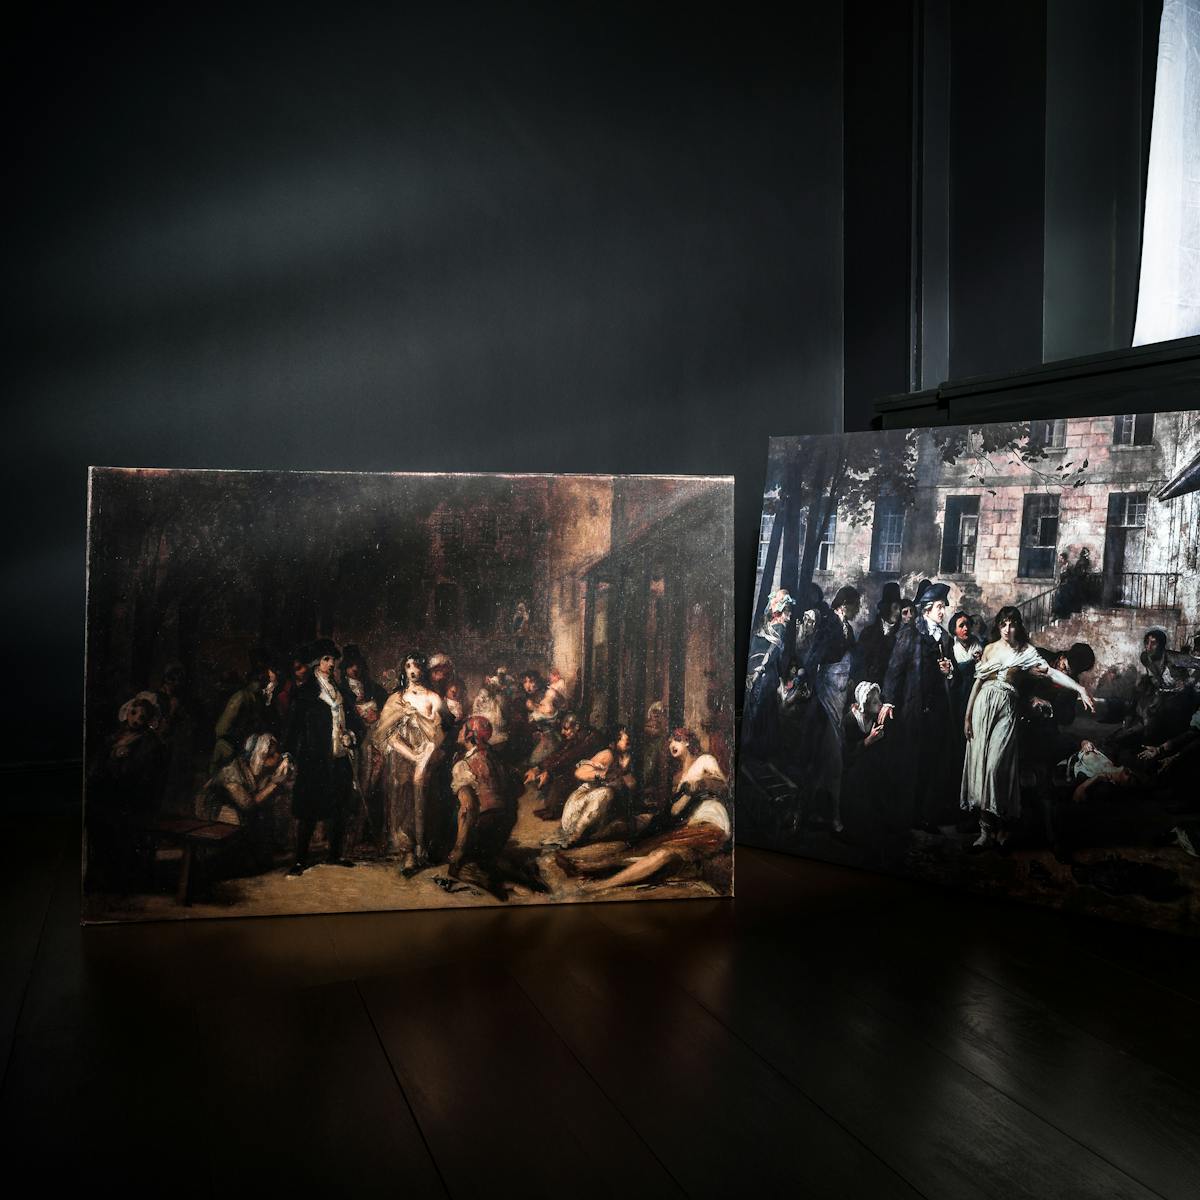 Photograph of two oil paintings propped against the walls in the corner of a dark room, on a wooden floor.  To the right is a recessed window with a white fabric curtain hanging in front of the glass. 